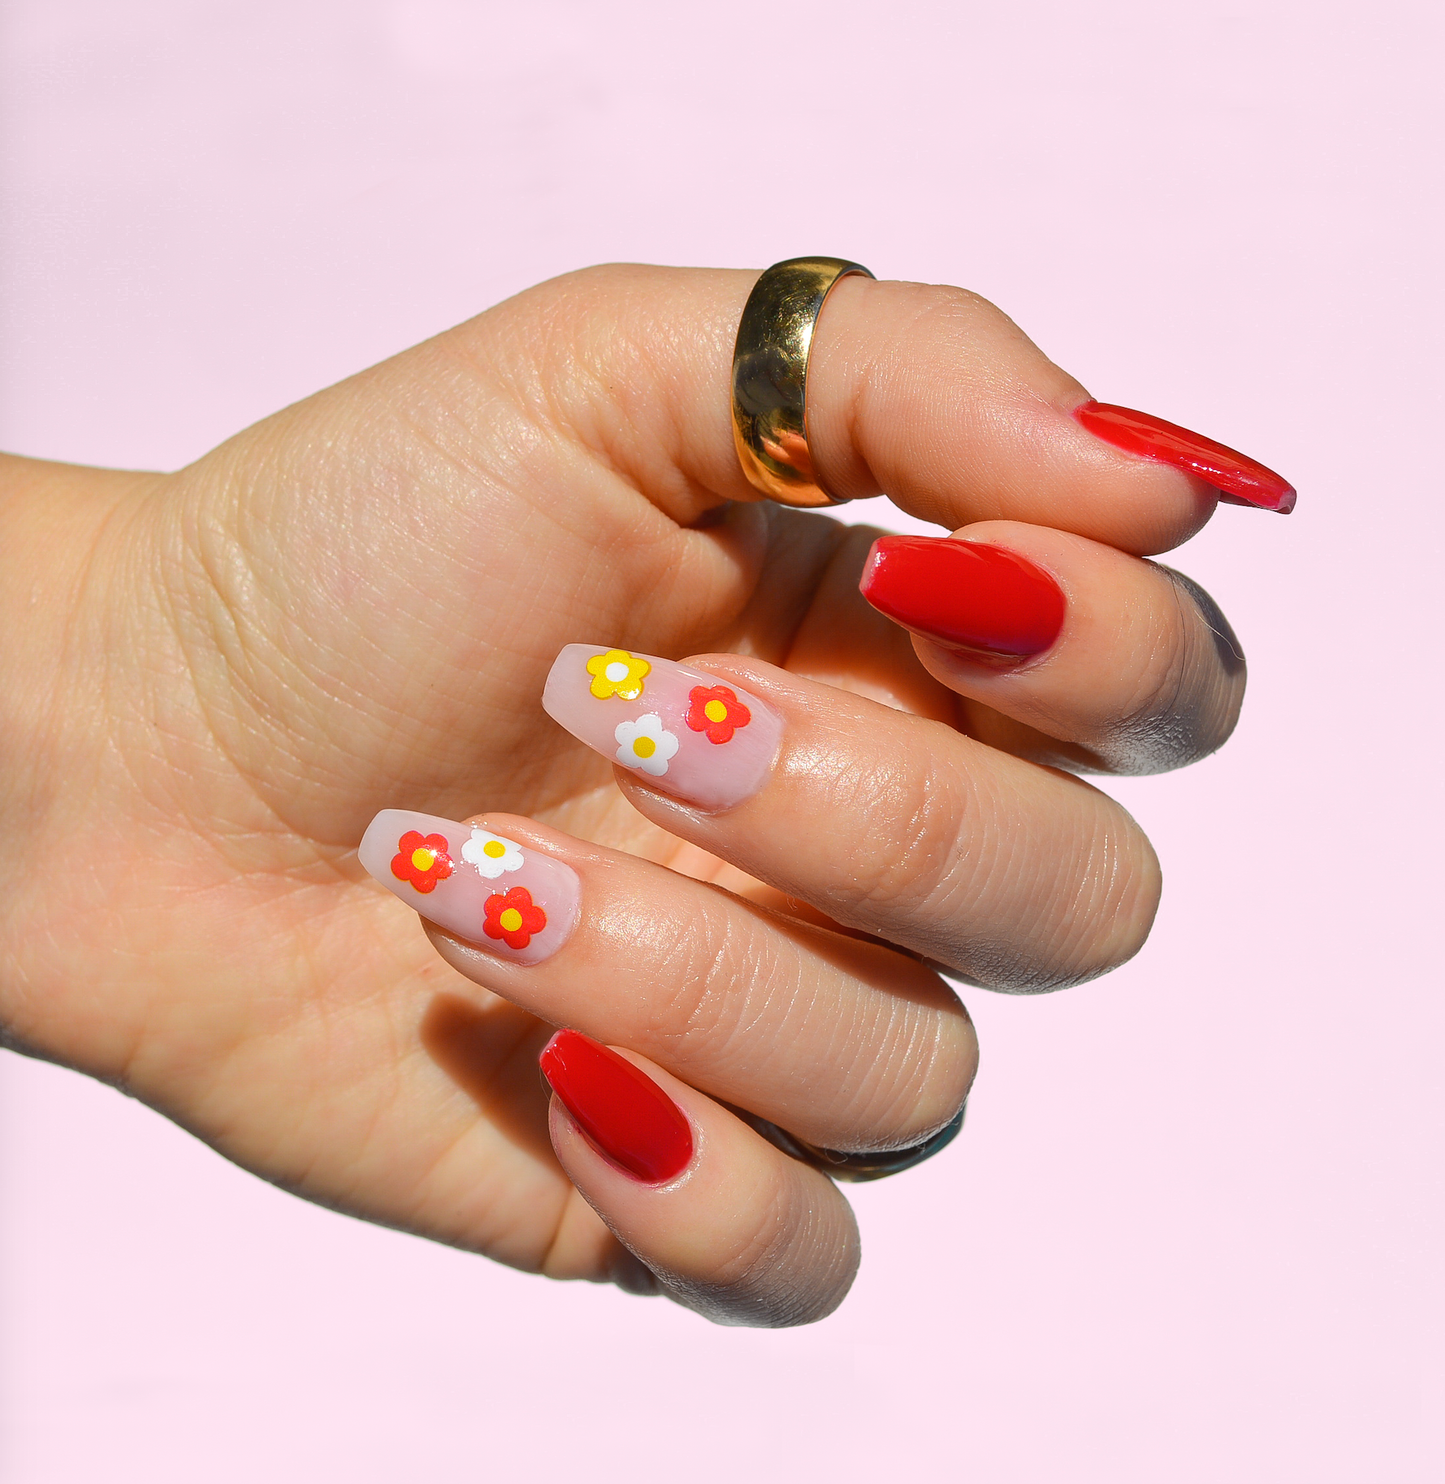 red nail polish look with 2 accent nails showing yellow red and white flowers